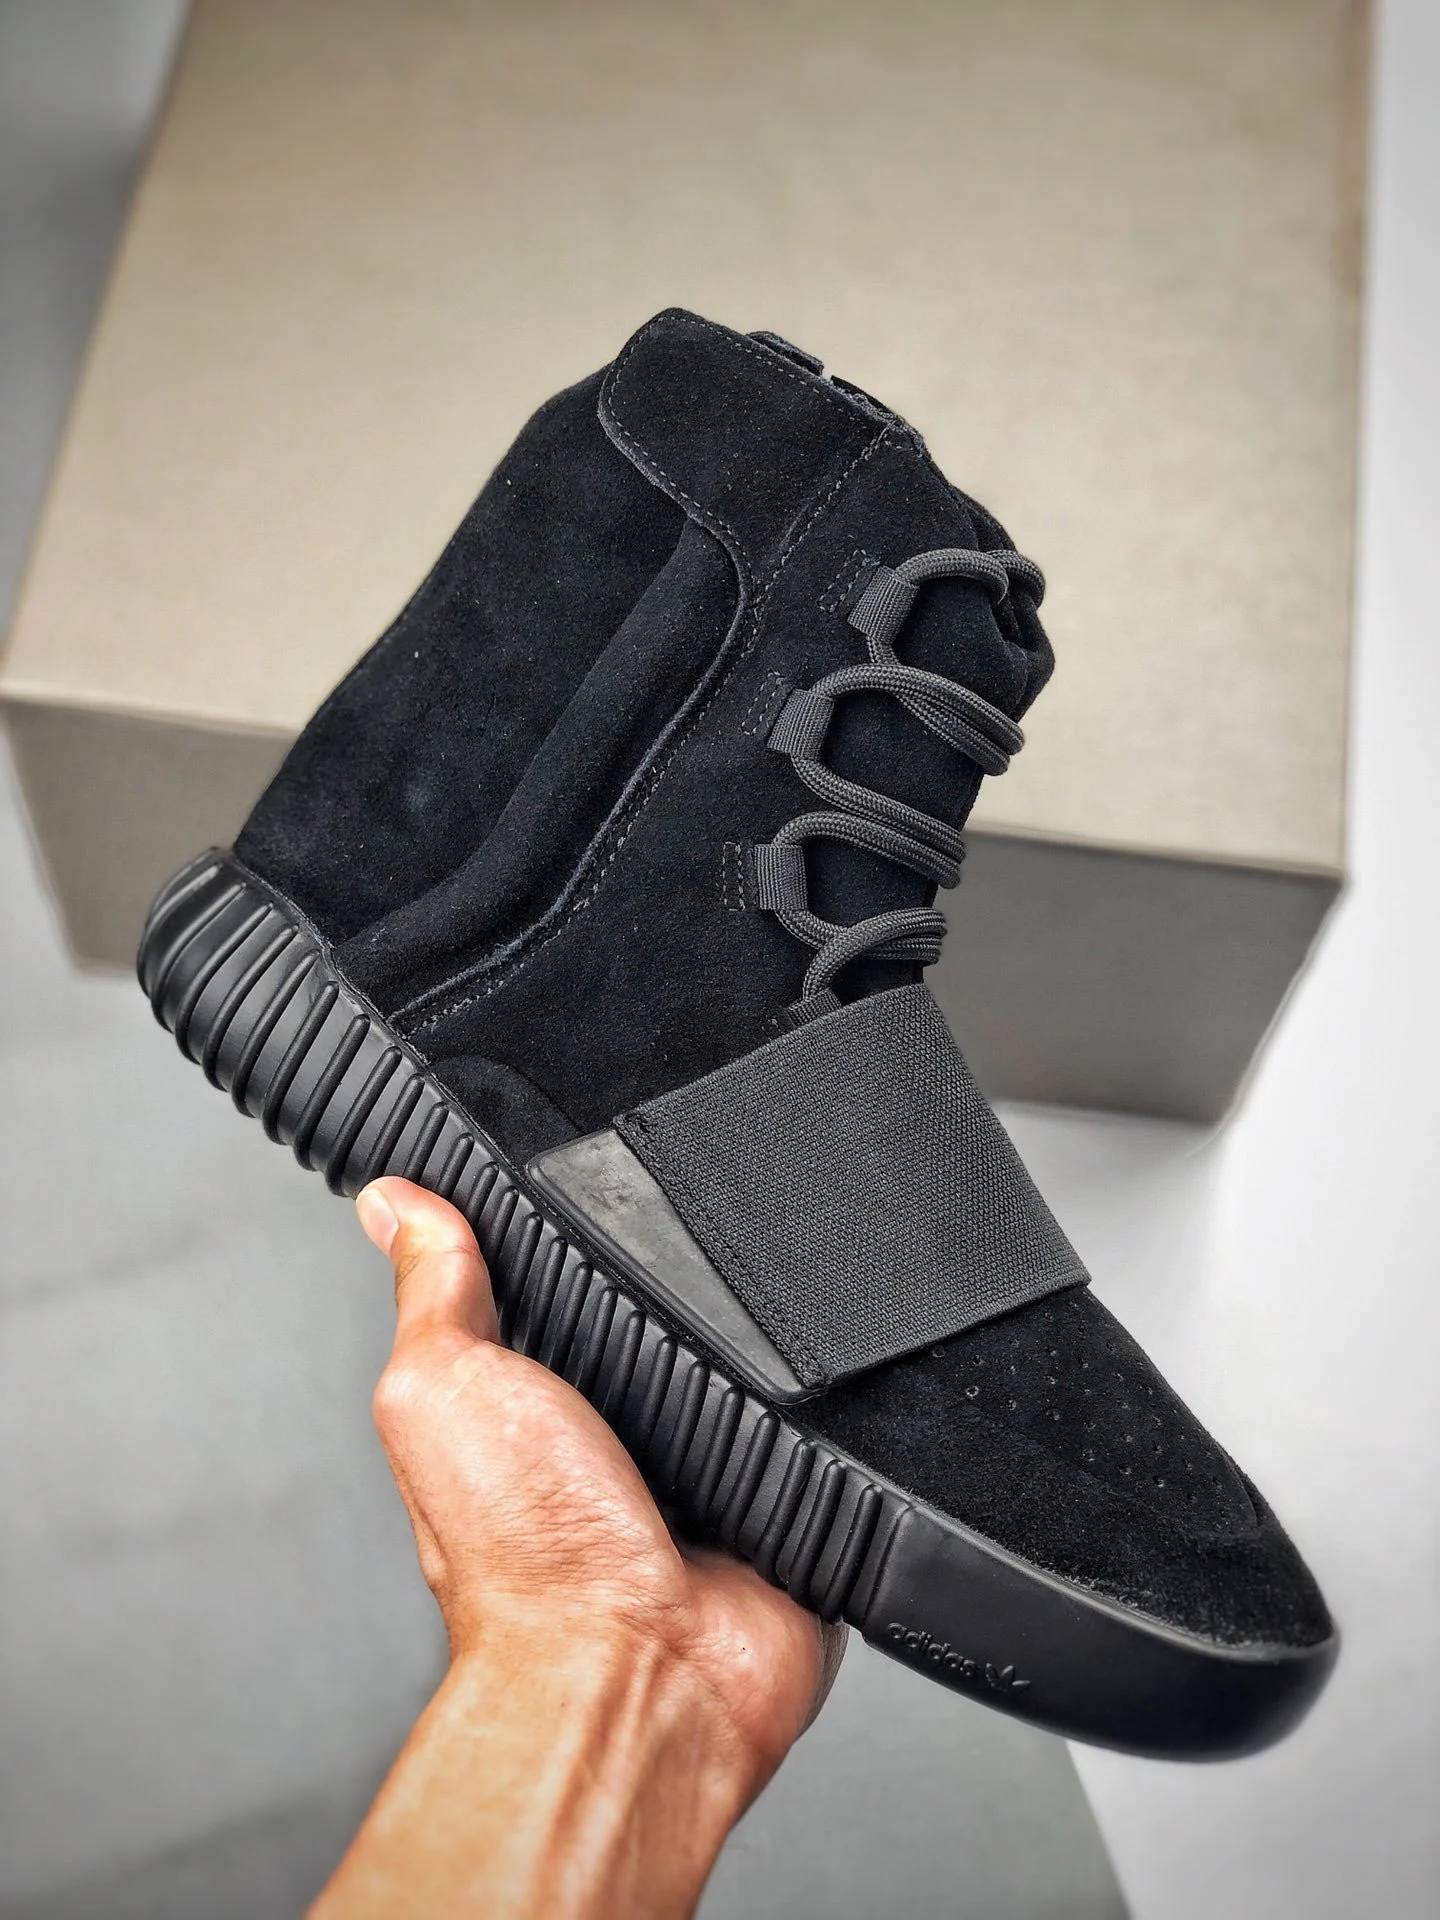 Adidas Yeezy 750 Boost Black BB1839 For Sale